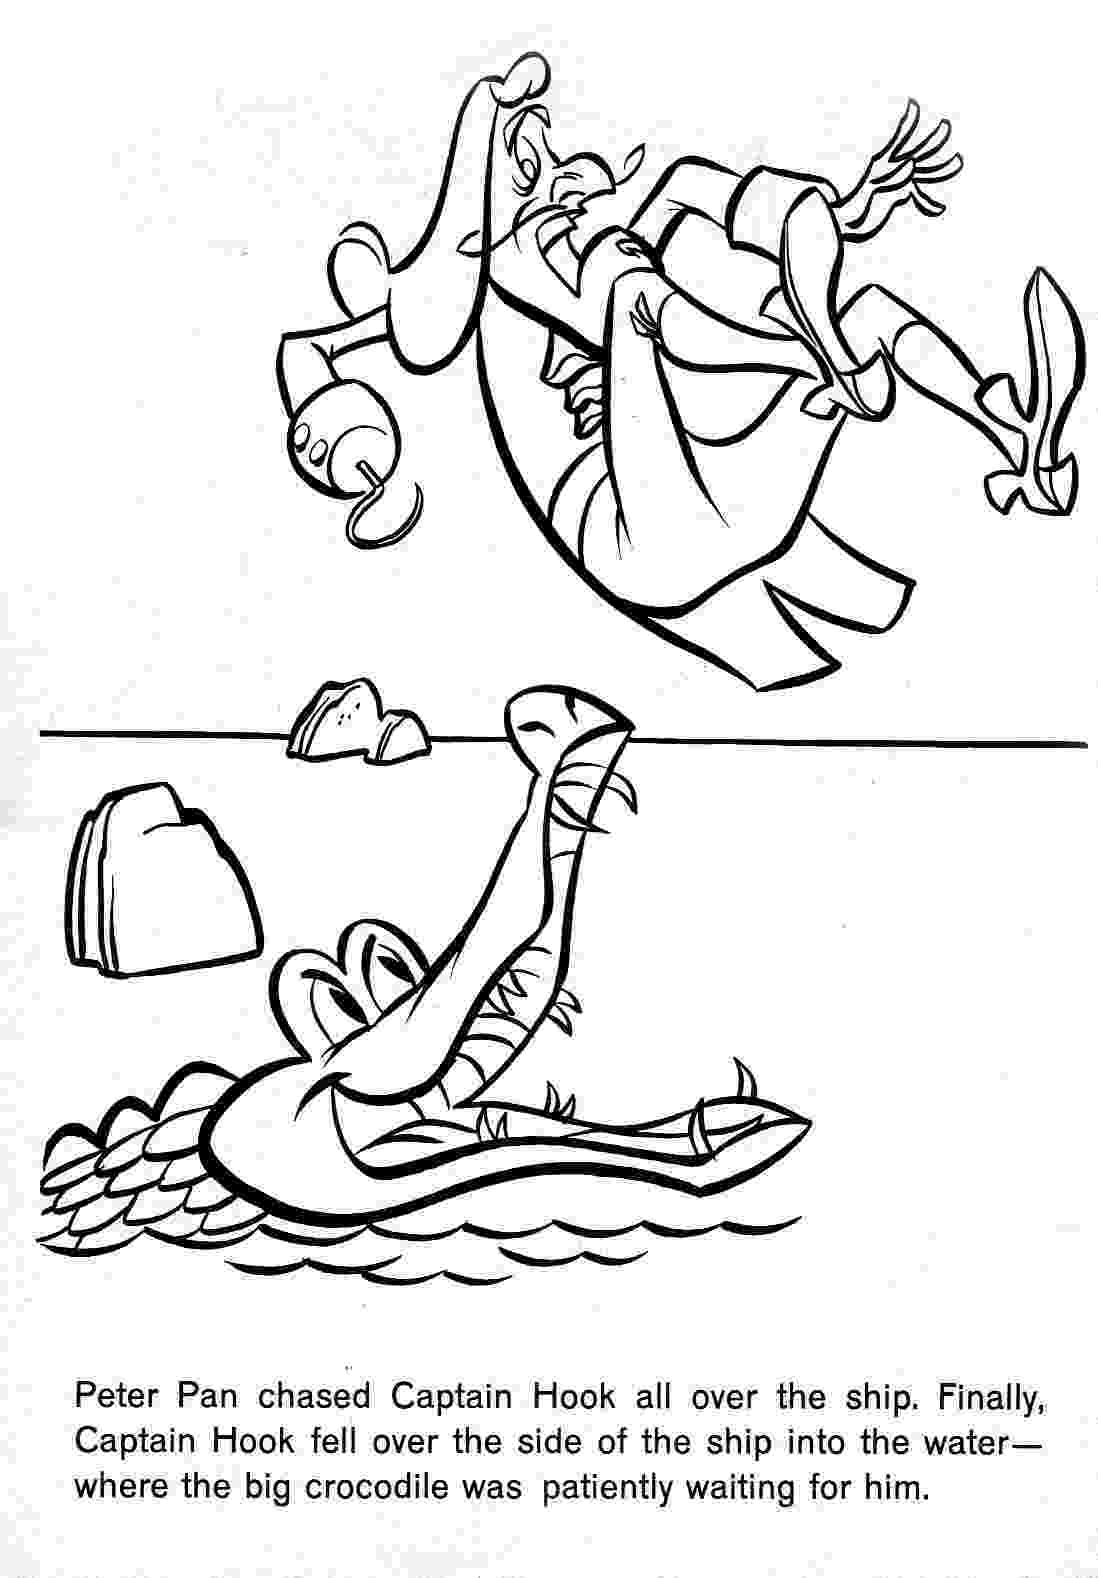 peter pan coloring pages peter pan coloring pages to download and print for free pages peter pan coloring 